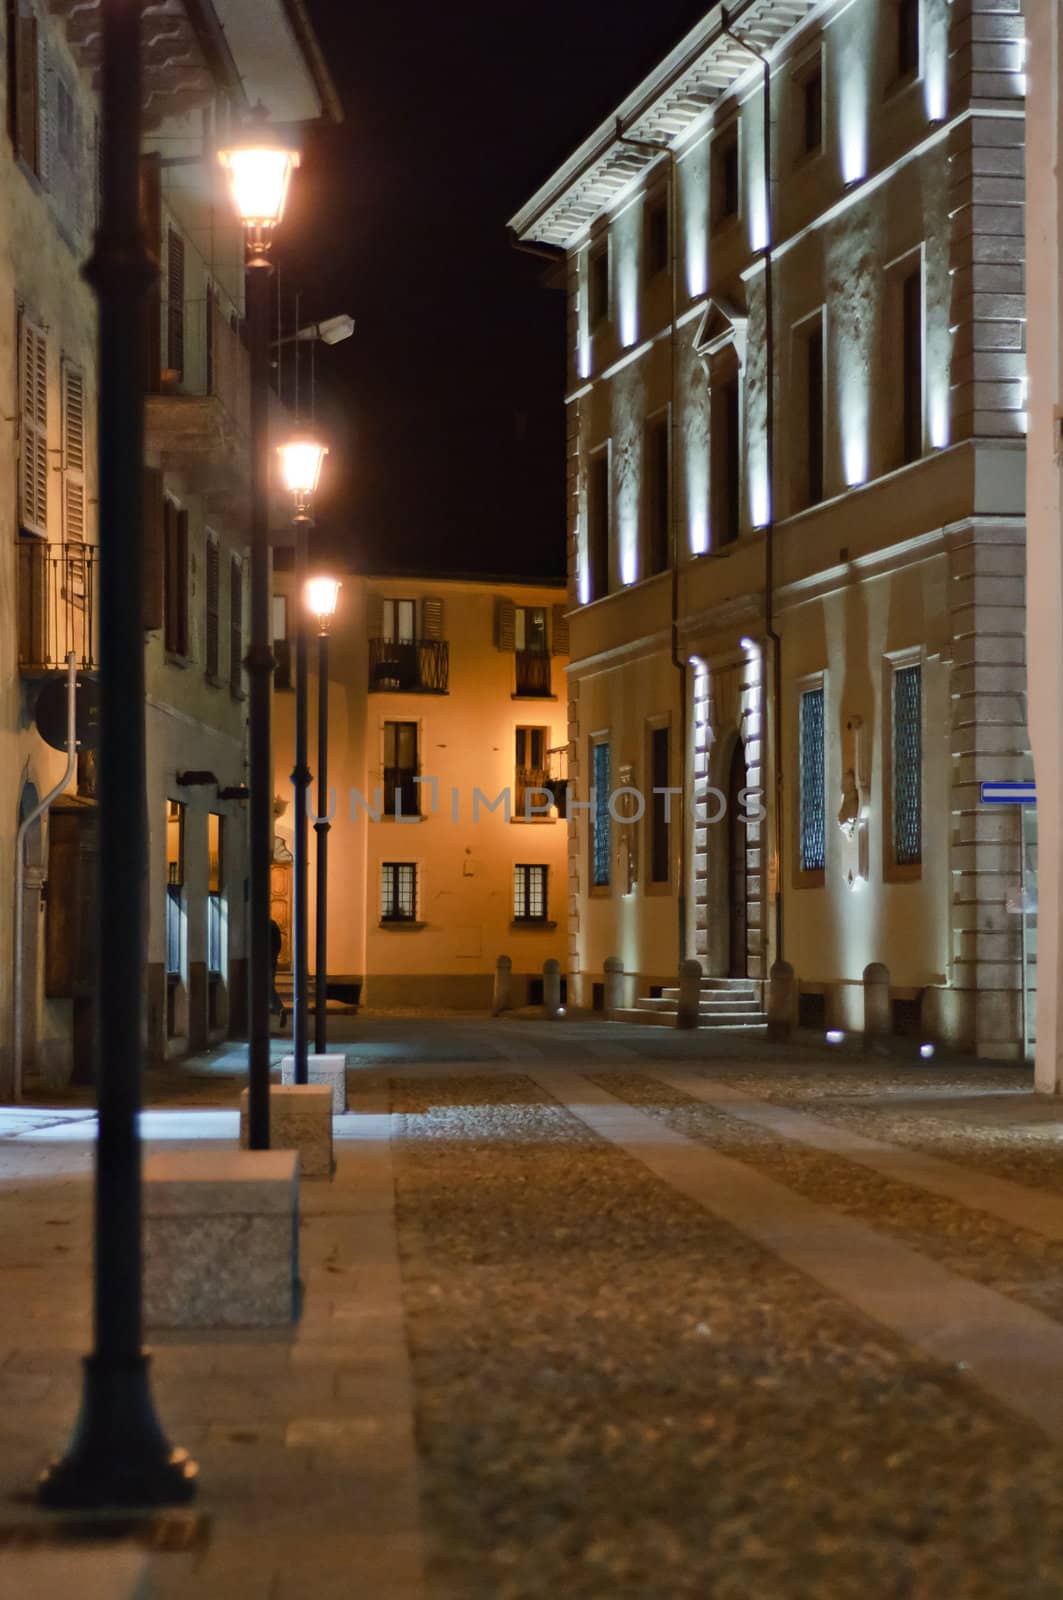 A nocturnal view of an Italian center town, Domodossola